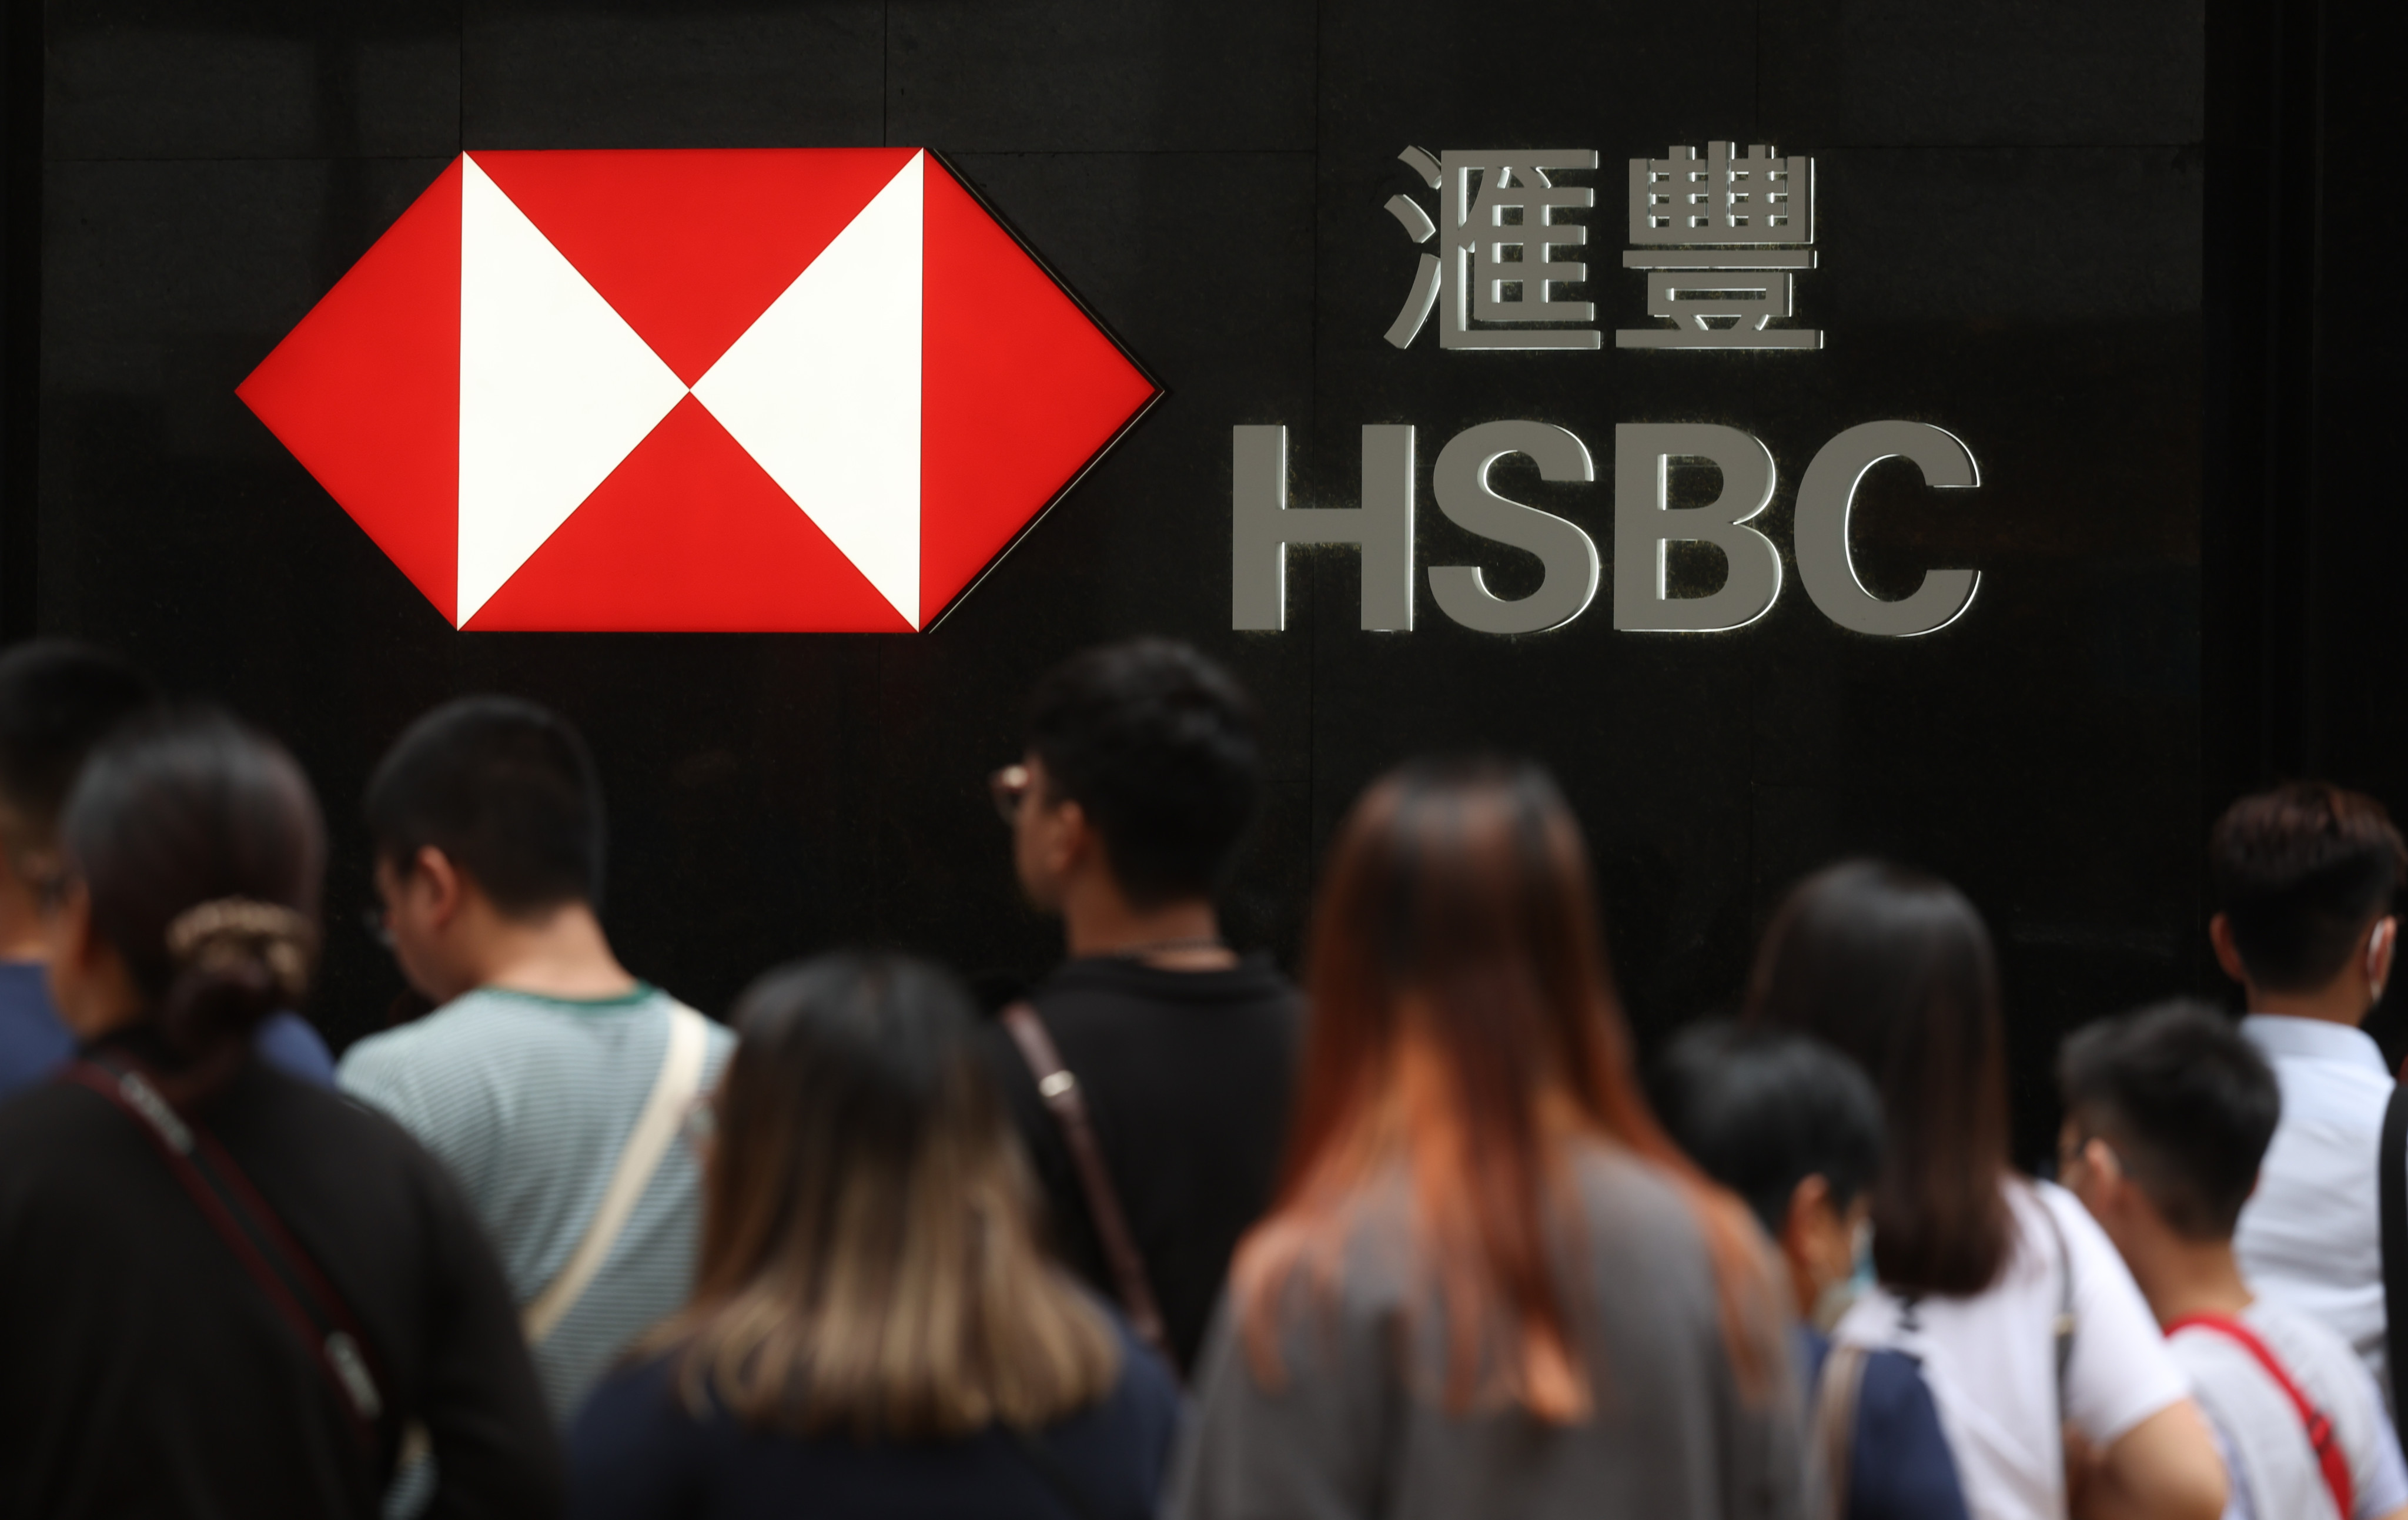 The HSBC logo designed by Henry Steiner is widely recognised. Photo: Yik Yeung-man